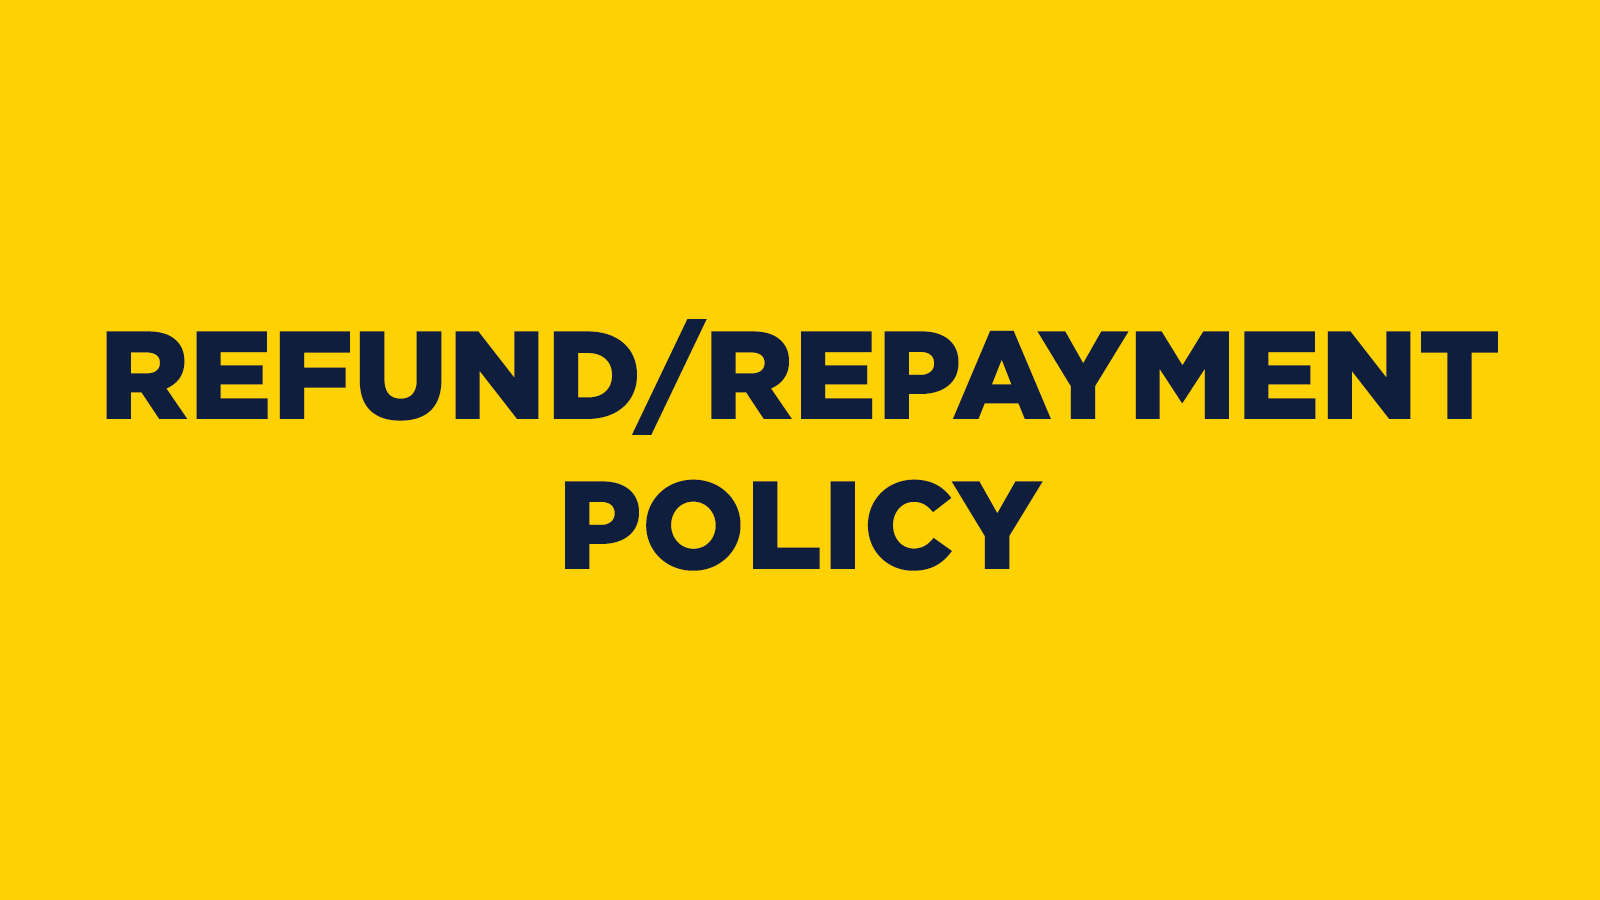 Refund/Repayment Policy